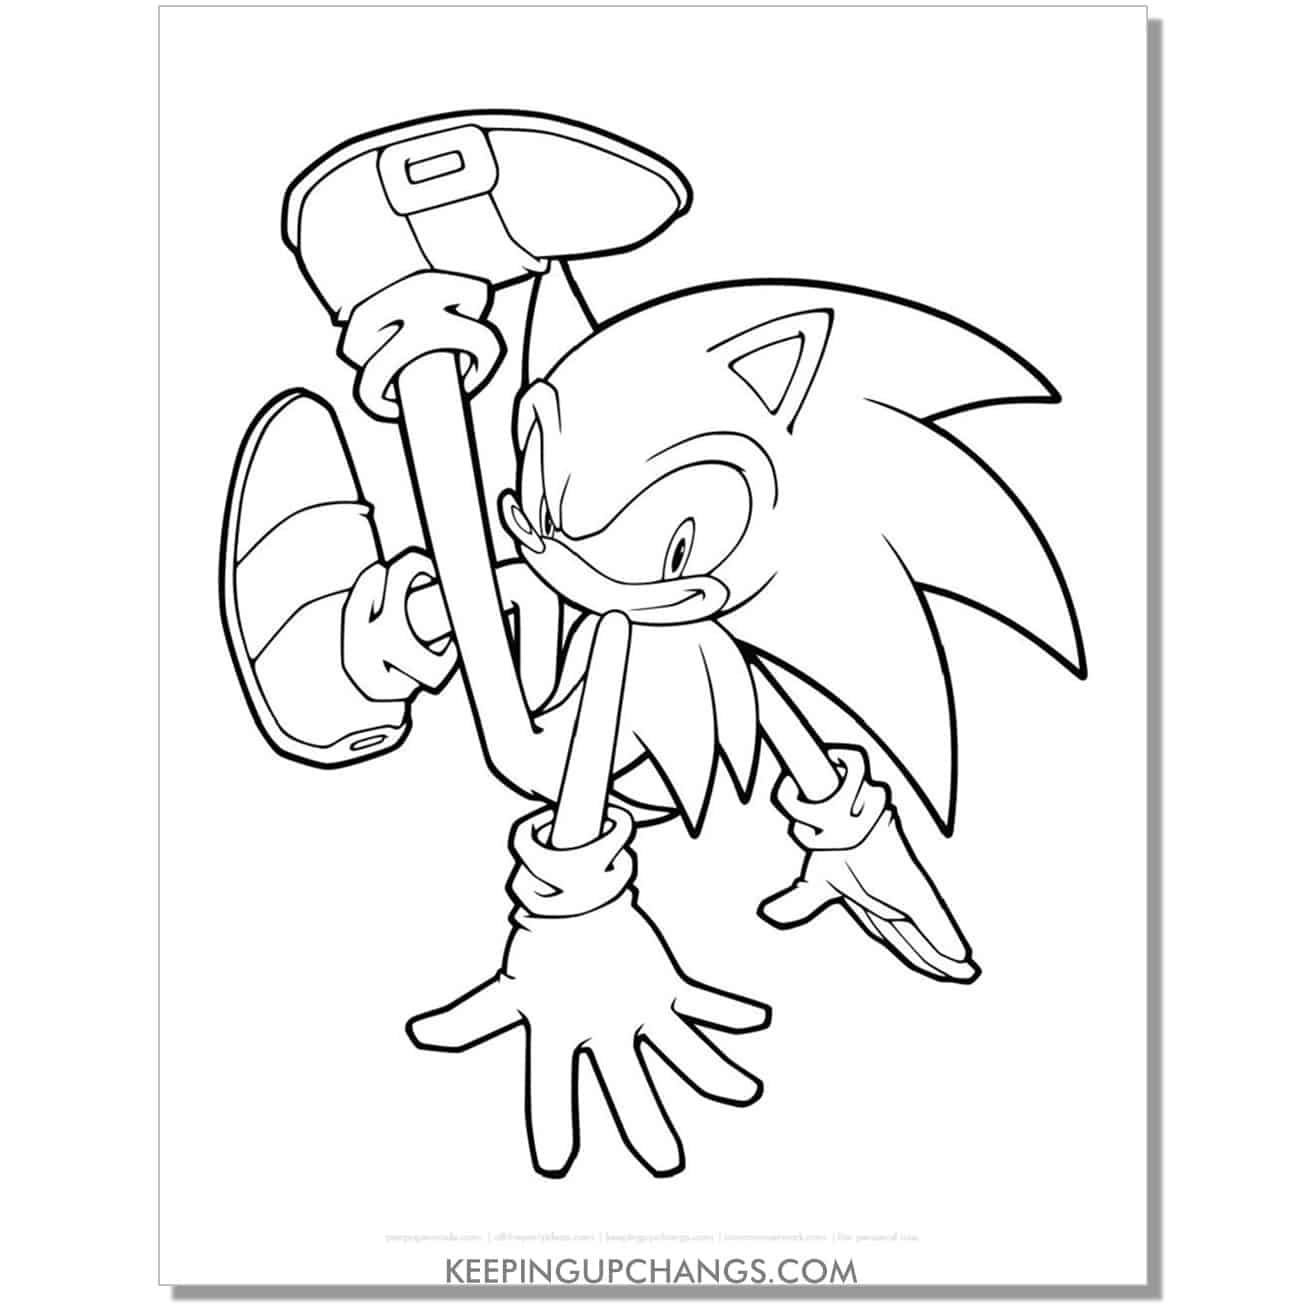 sonic climbing on wall and ceiling coloring page.